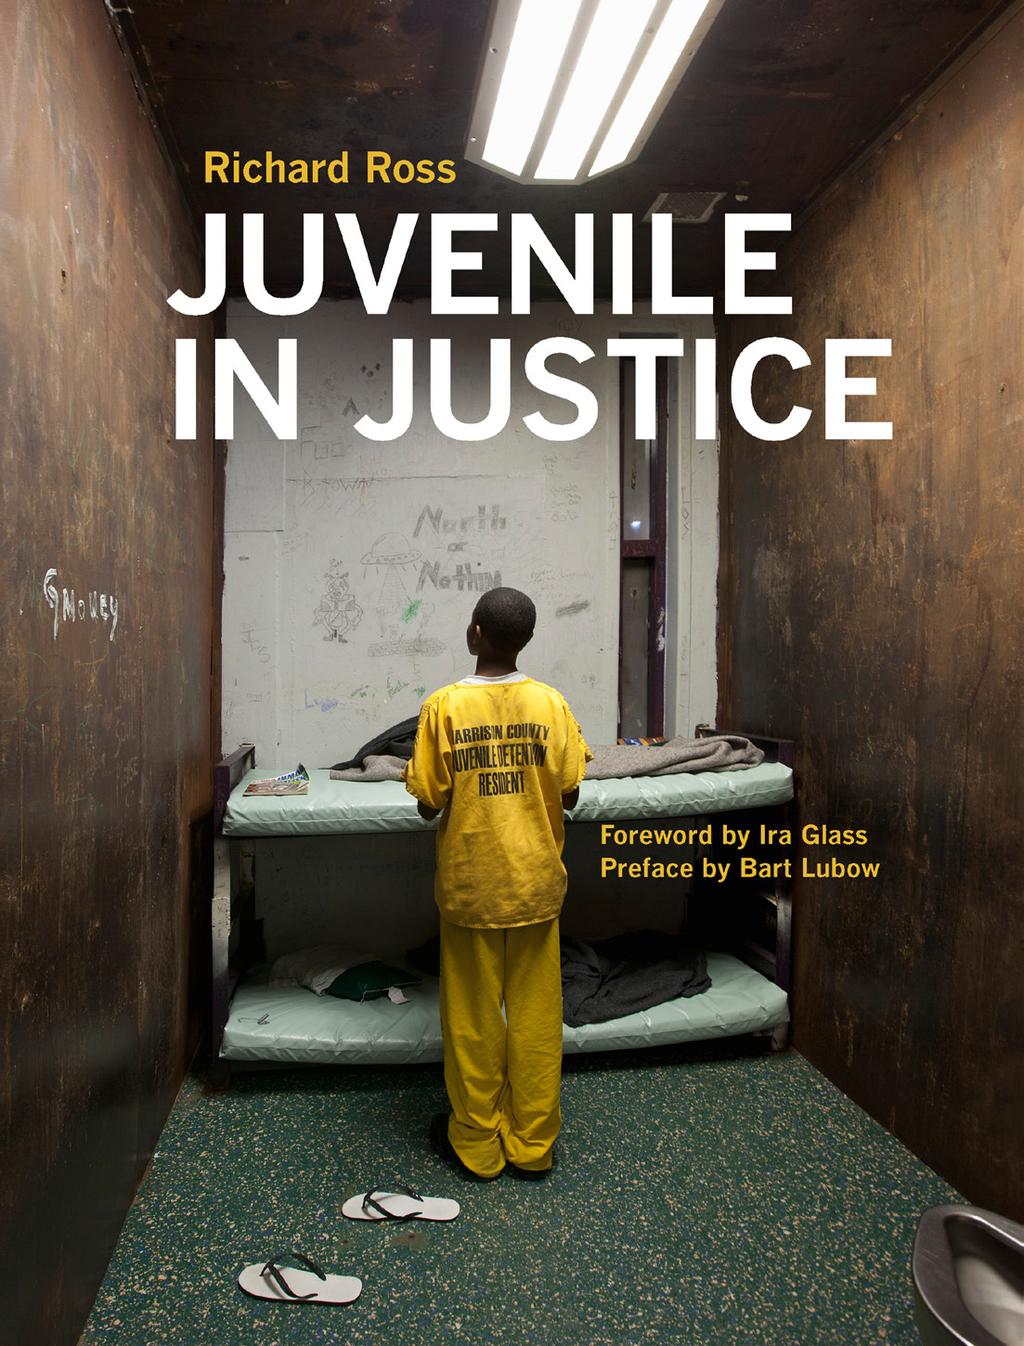 In 2012 Juvenile In Justice the book was published, with over 150 photographs and essays by Ira Glass of public radio s This American Life and Bart Lubow of the Annie E. Casey Foundation.